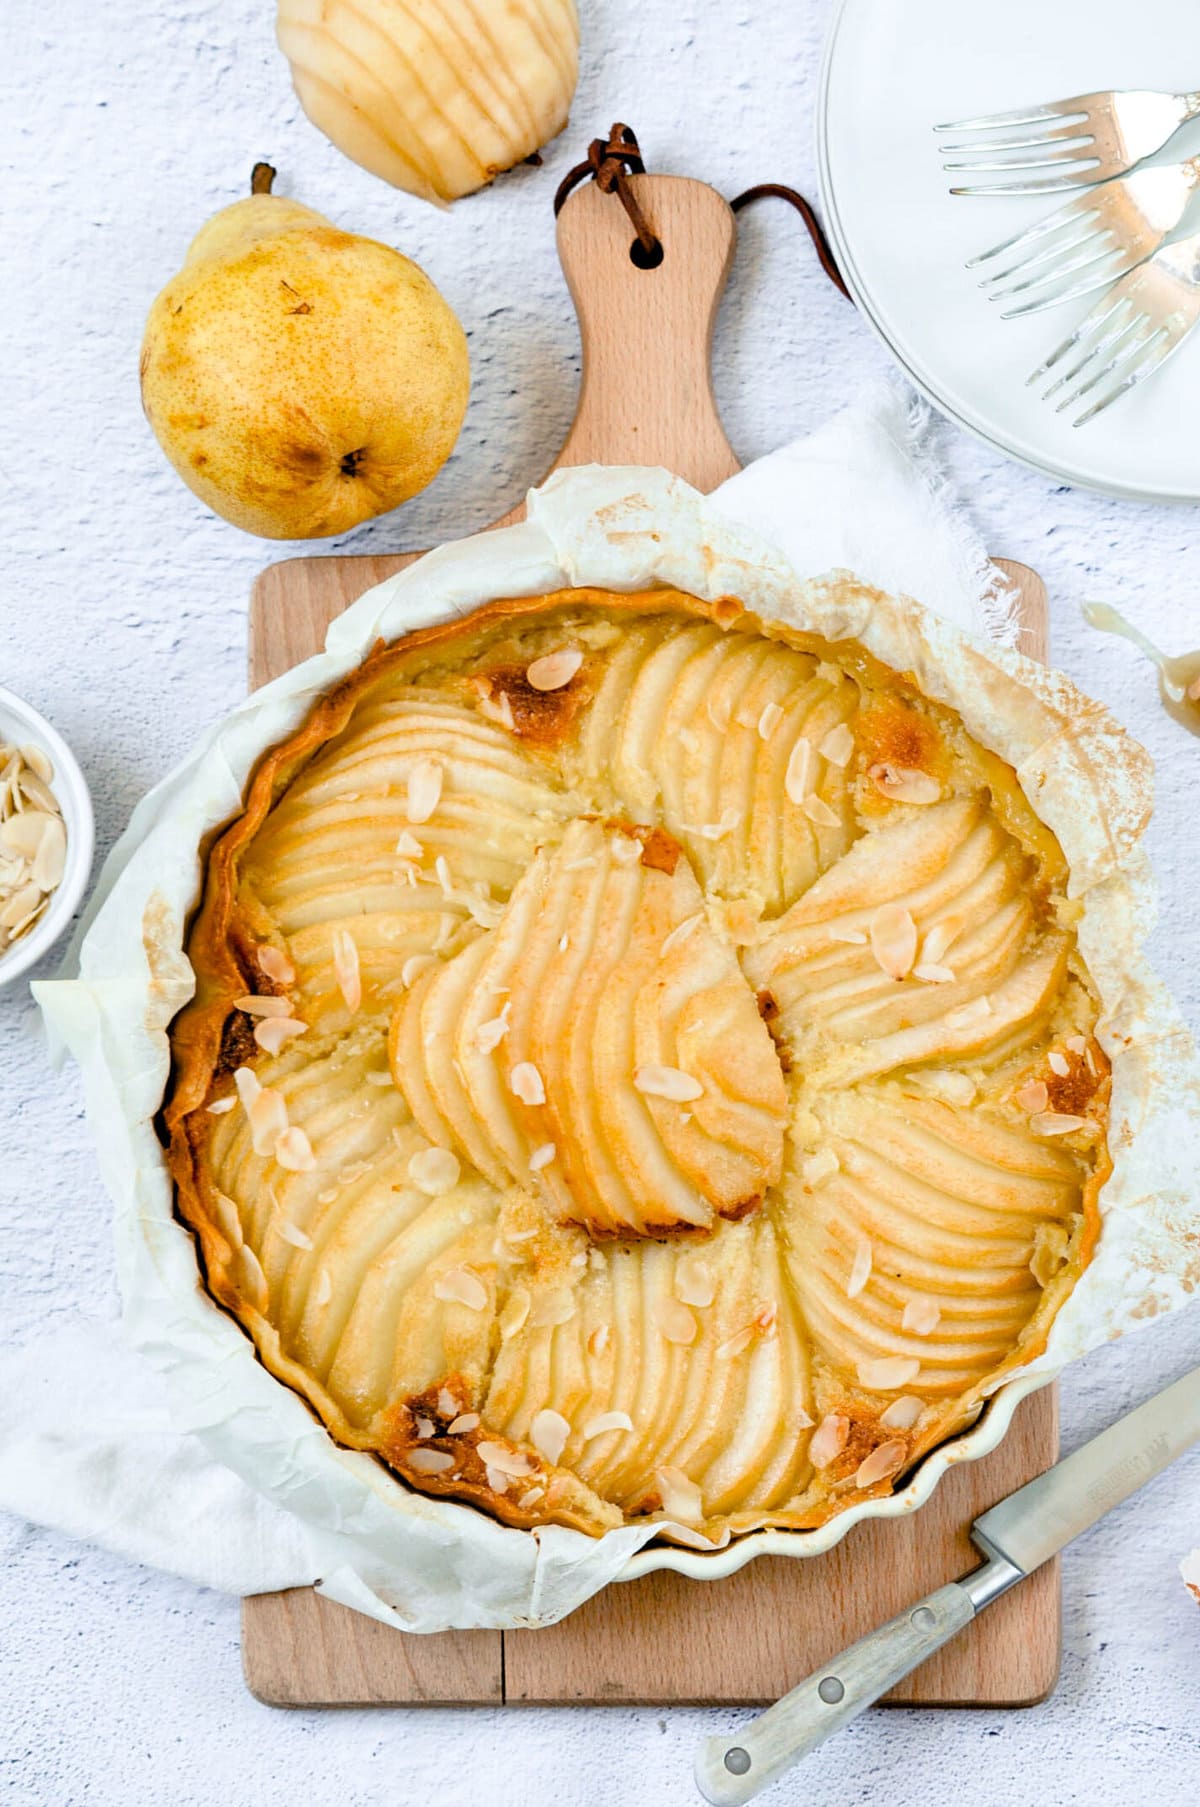 Pear tart on a board with several pears.